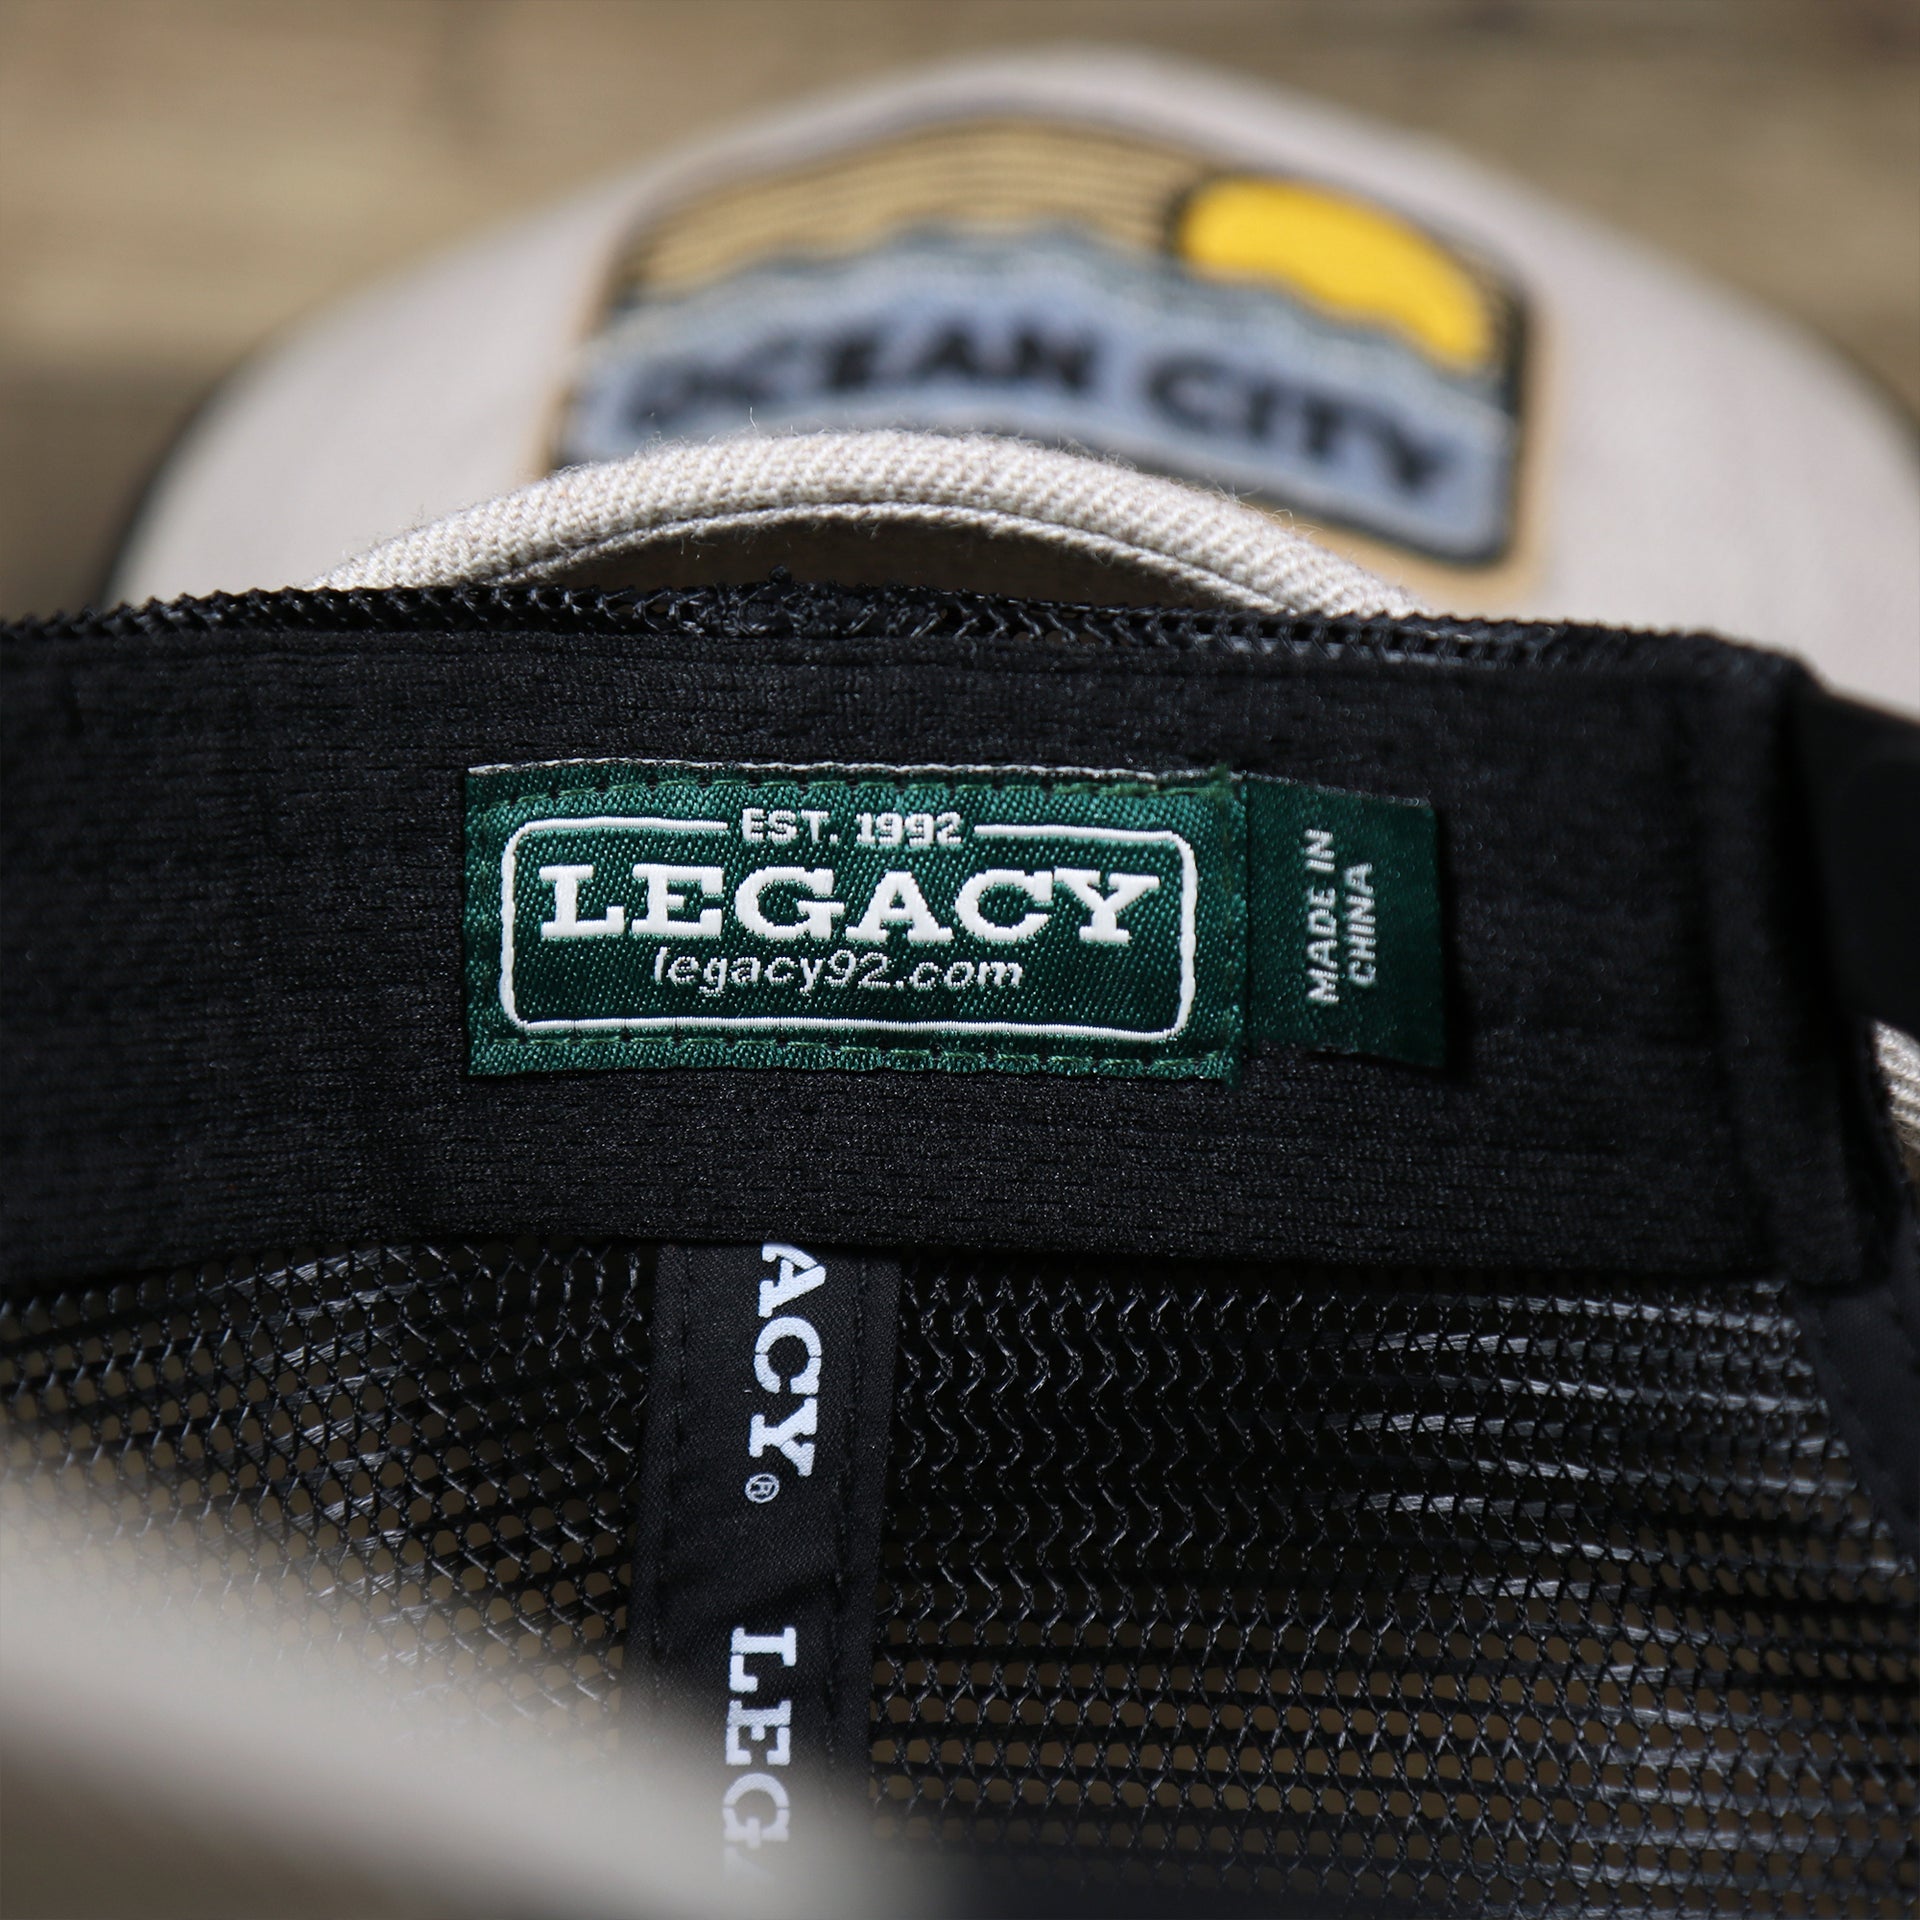 The Legacy Tag on the New Jersey Ocean City Sunset Mesh Back Trucker Hat | Heather Tan And Black Mesh Trucker Hat